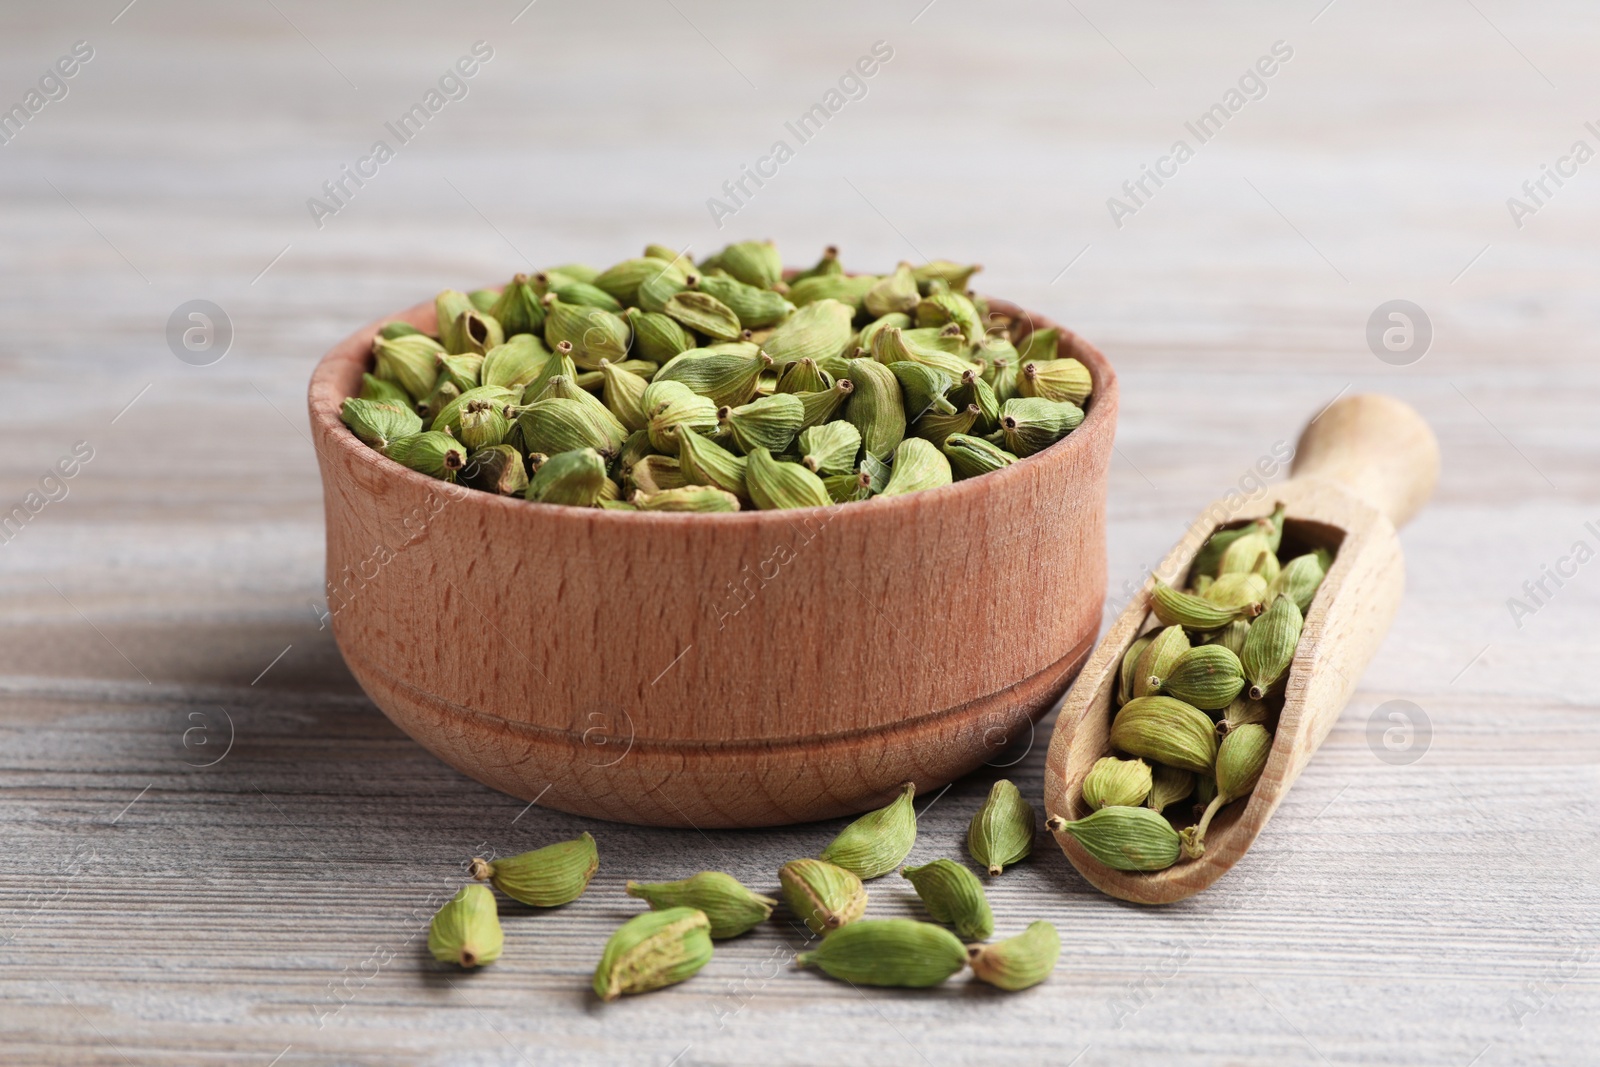 Photo of Bowl and scoop with dry cardamom pods on wooden table, closeup